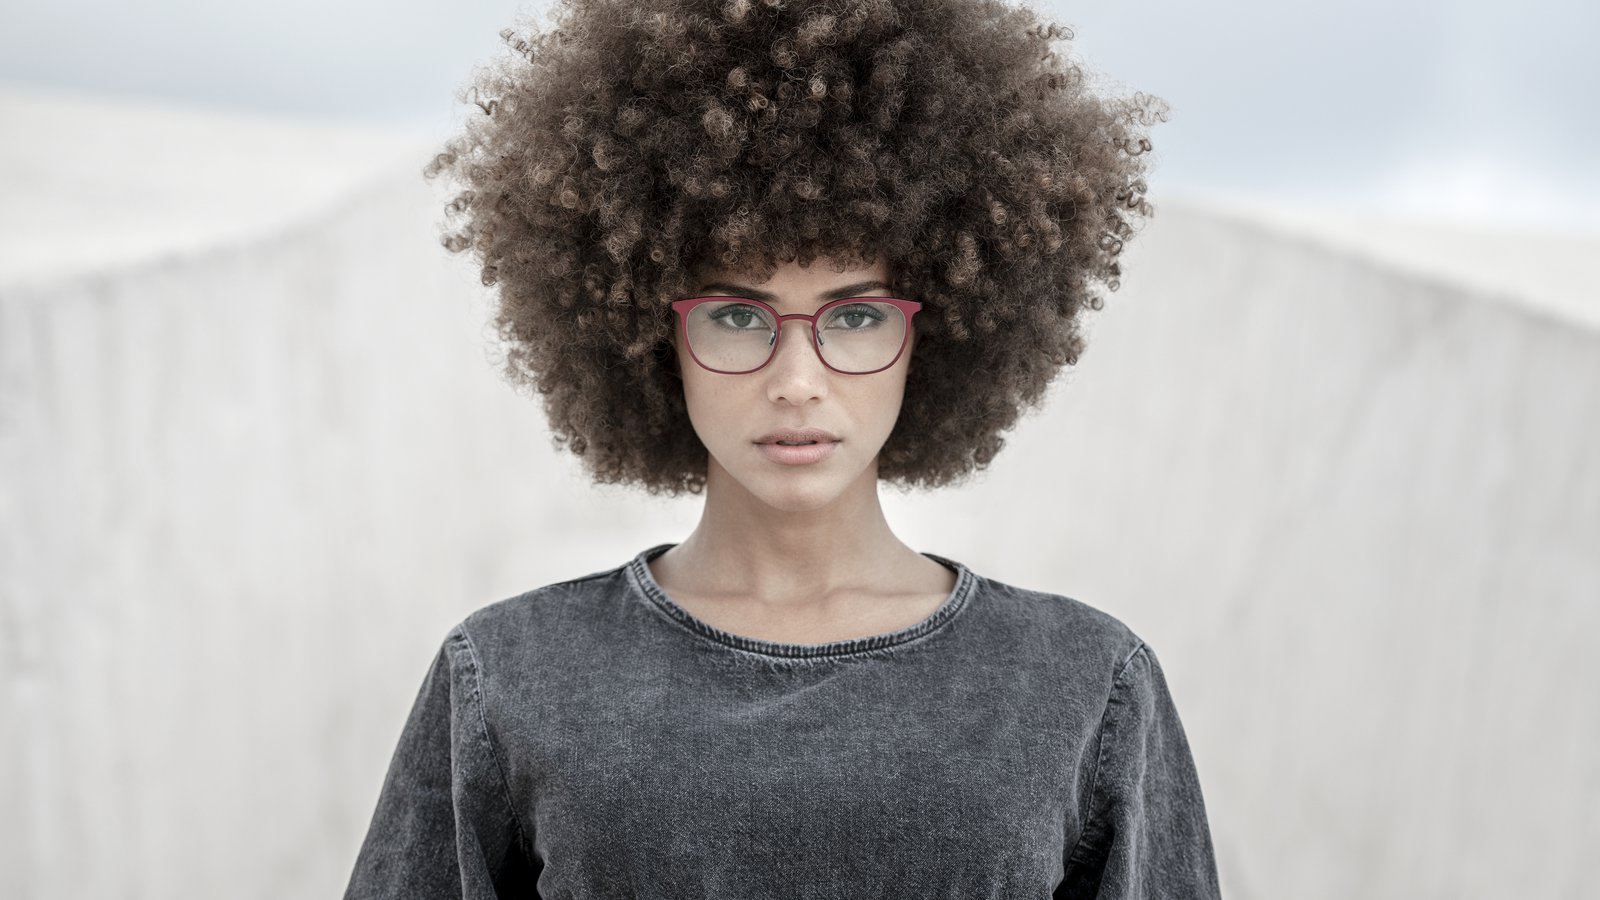 Eyeglasses by BLACKFIN from article The Best Independent Eyewear Brands published by FAVR the premium eyewear finder.